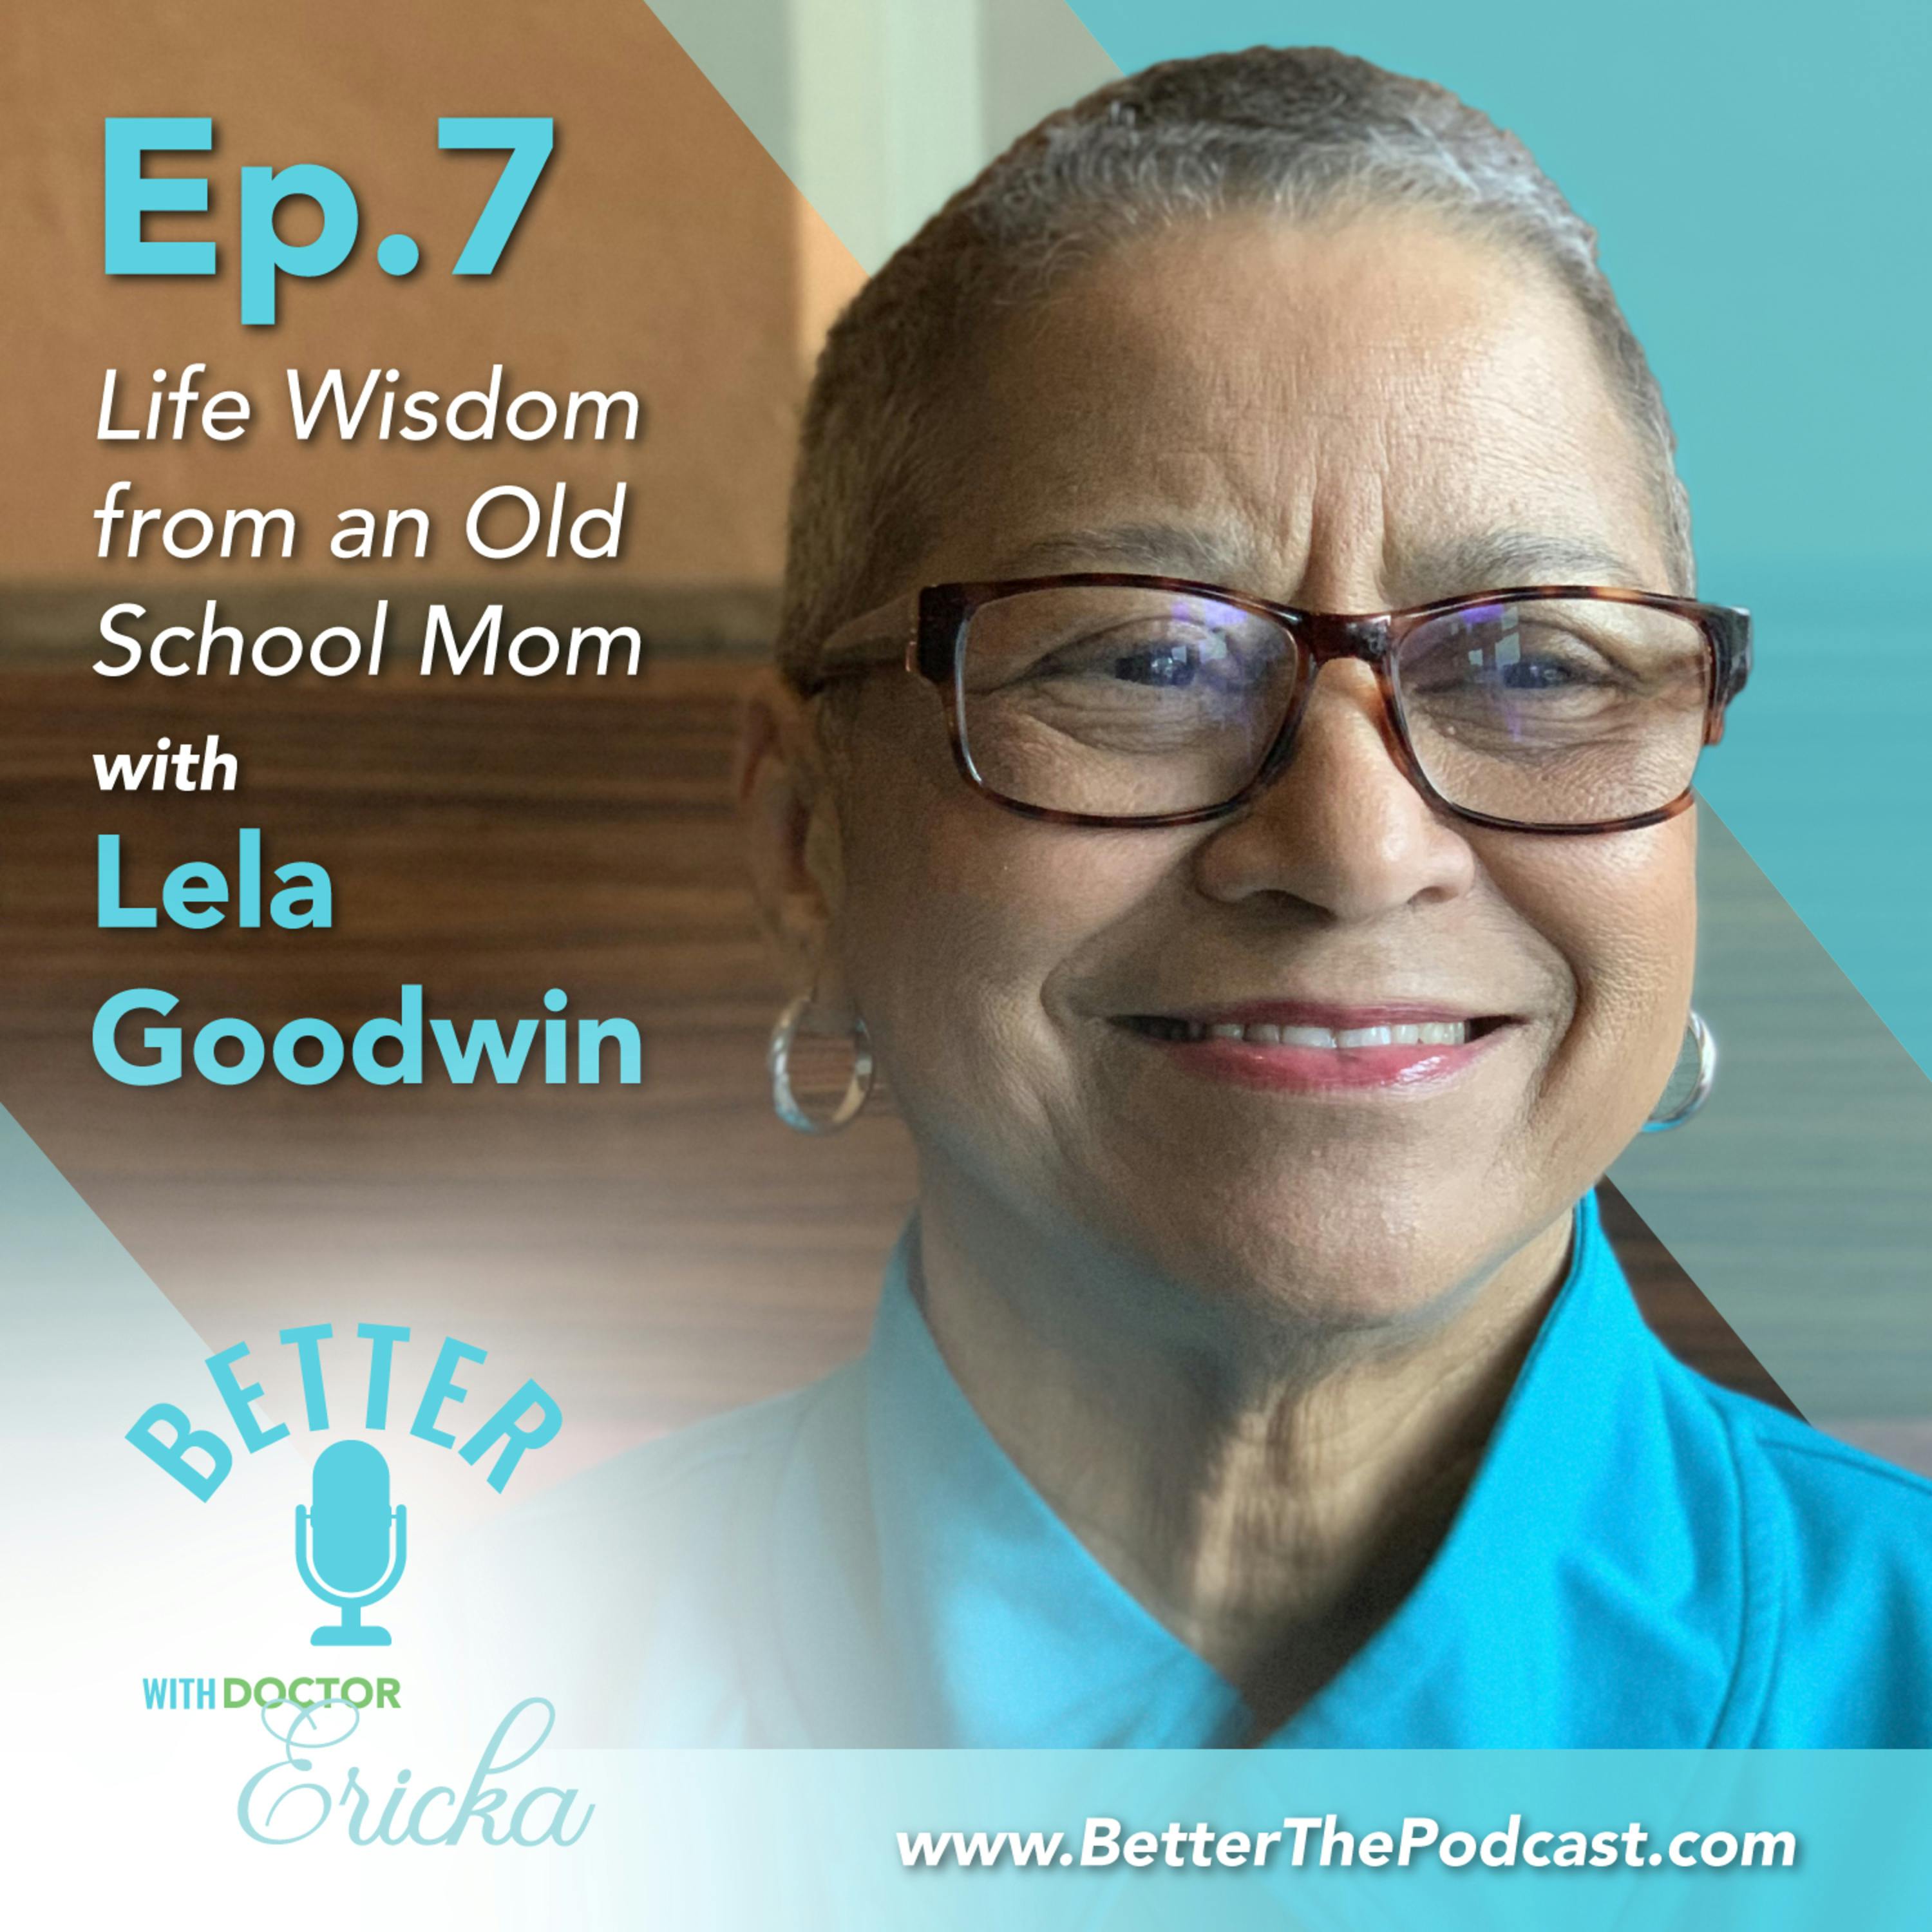 Life Wisdom from an Old School Mom with Lela Goodwin